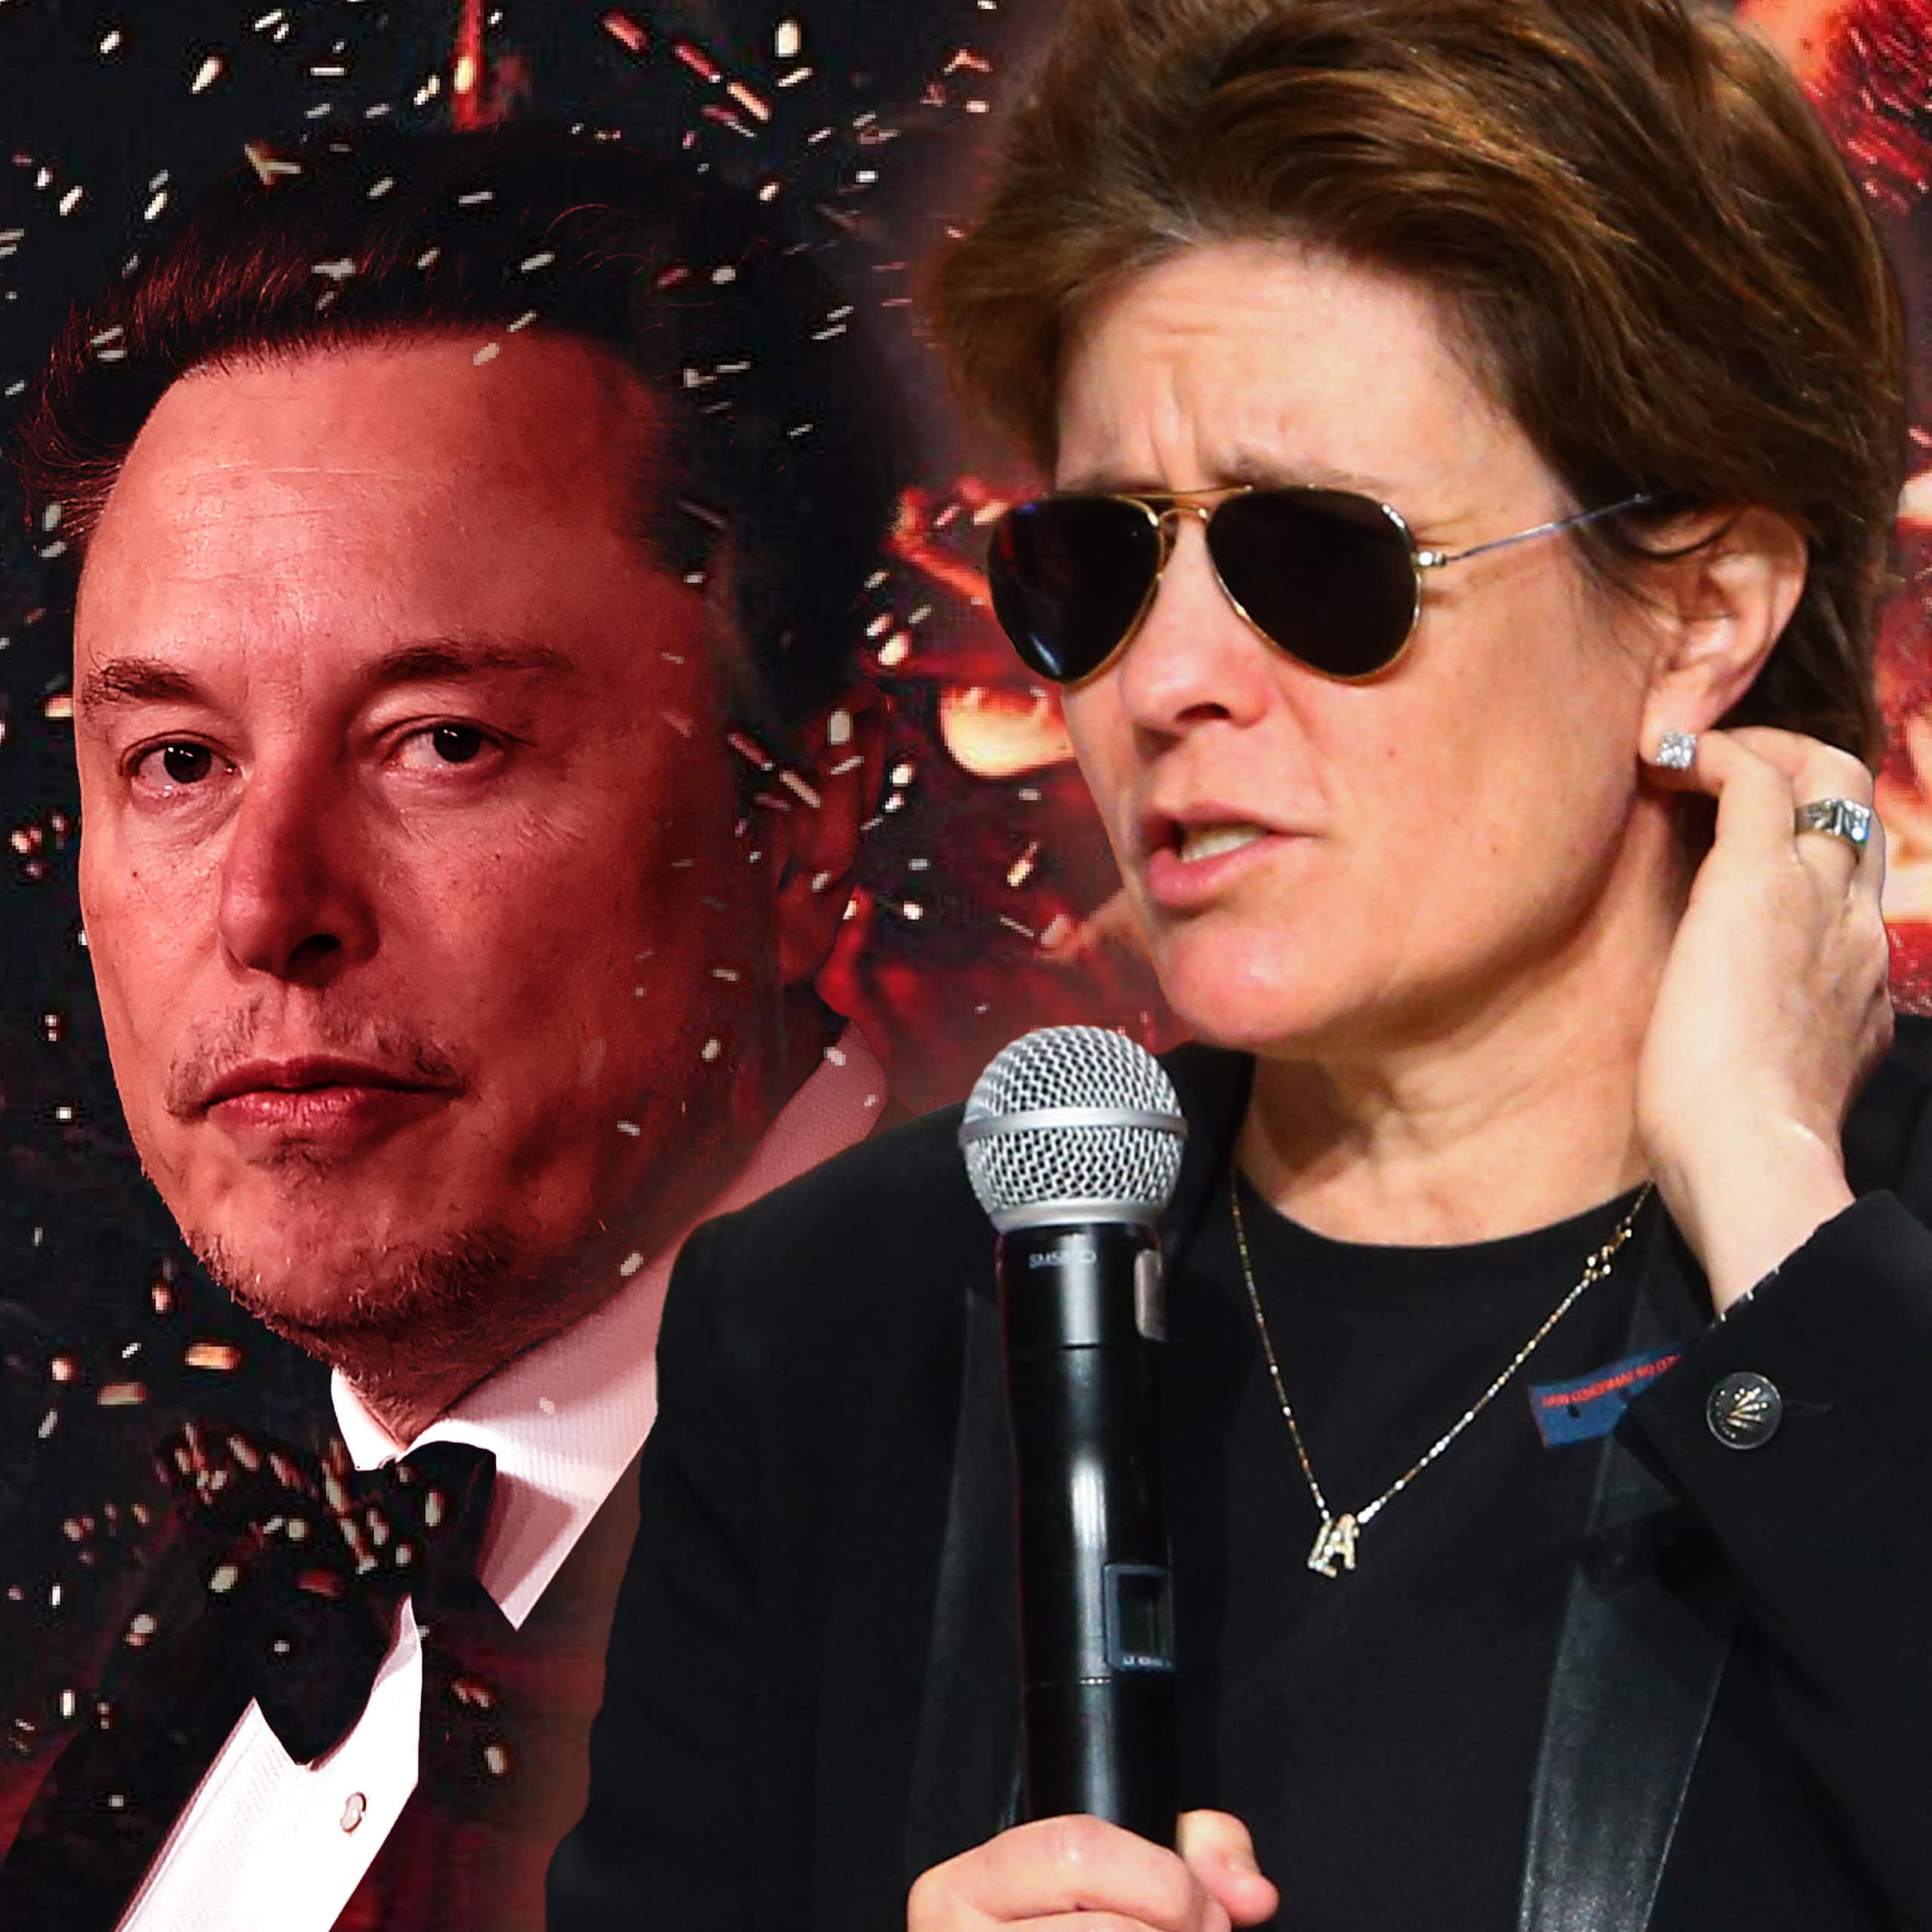 Kara Swisher with Elon Musk and Mark Zuckerberg in the background and sparks and flame overlayed on top